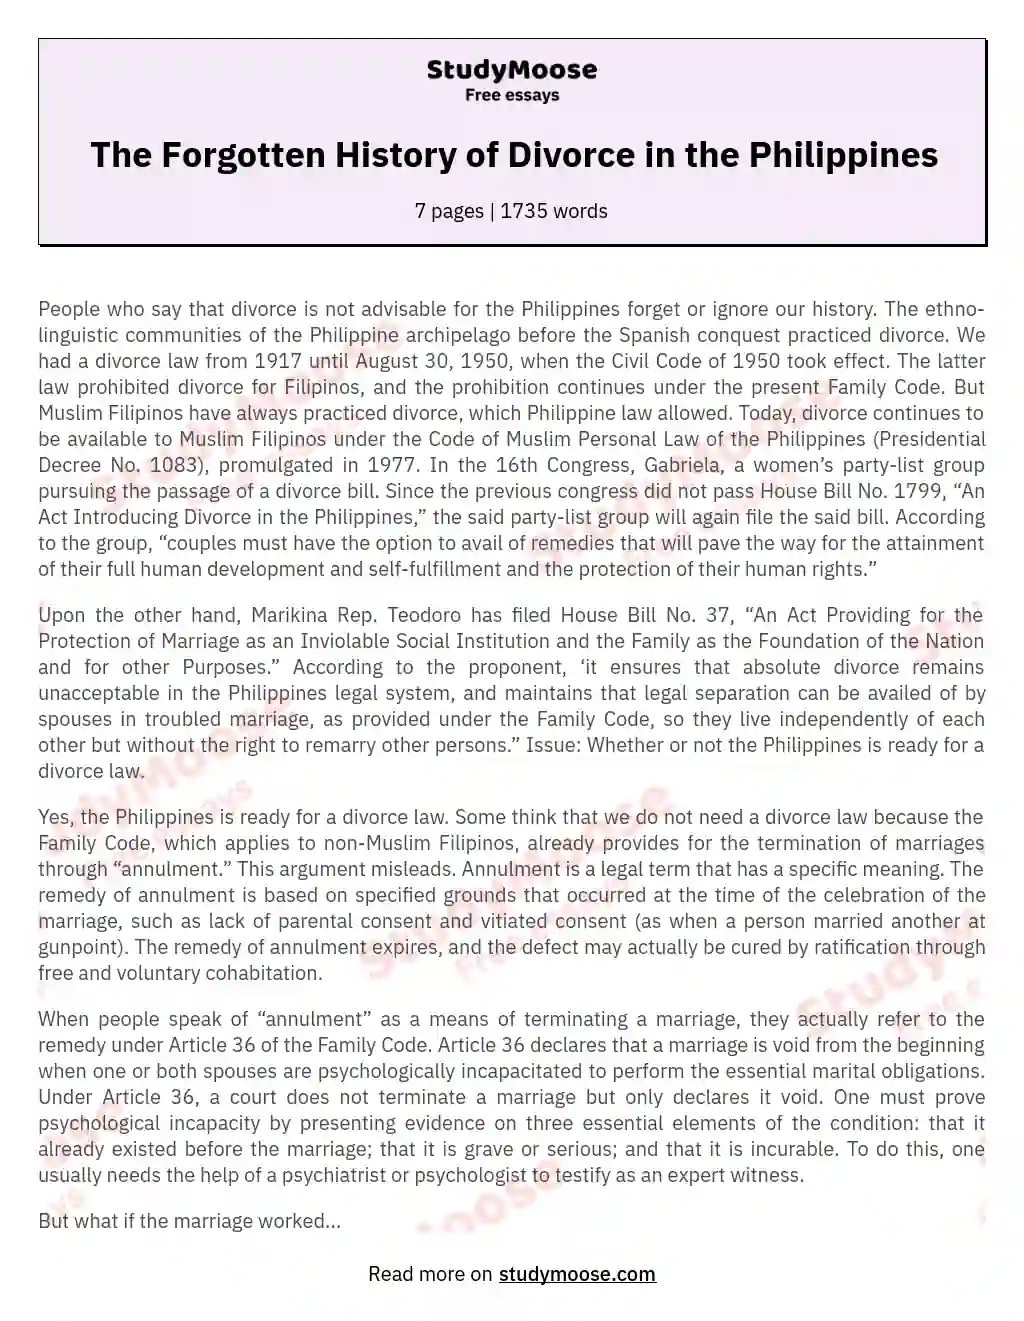 The Forgotten History of Divorce in the Philippines essay